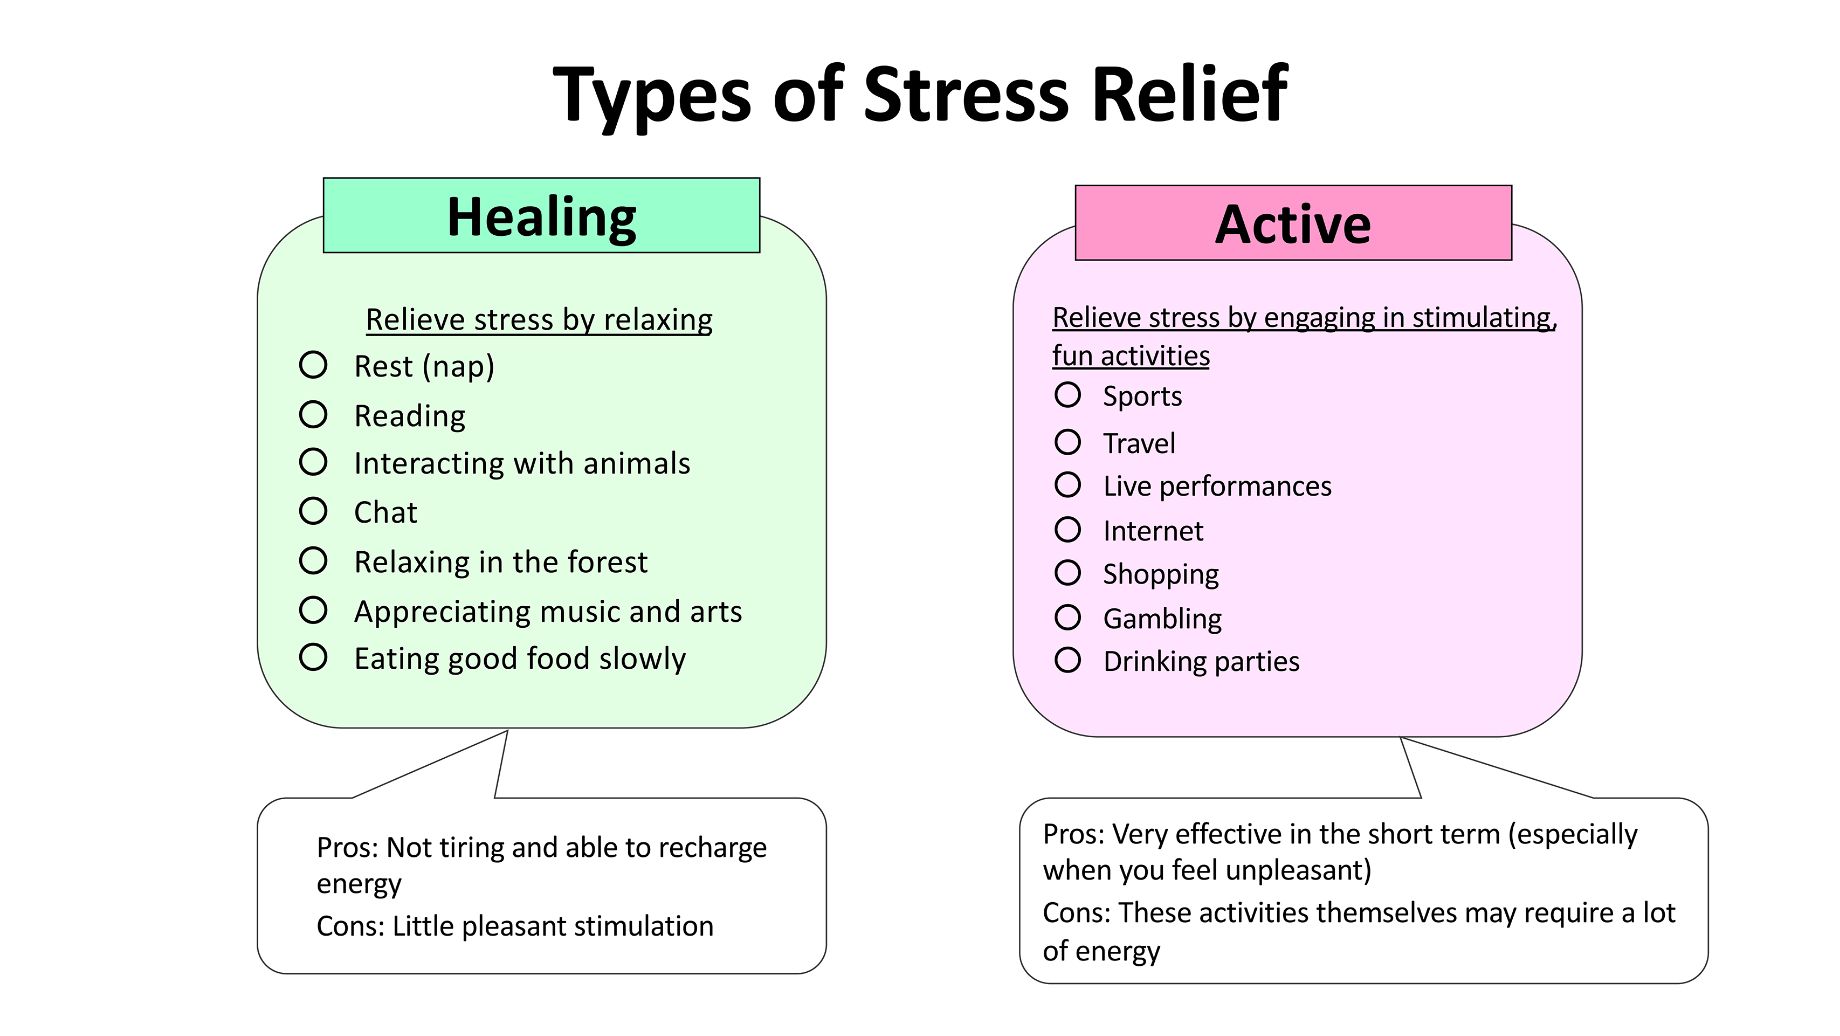 Types of Stress Relief